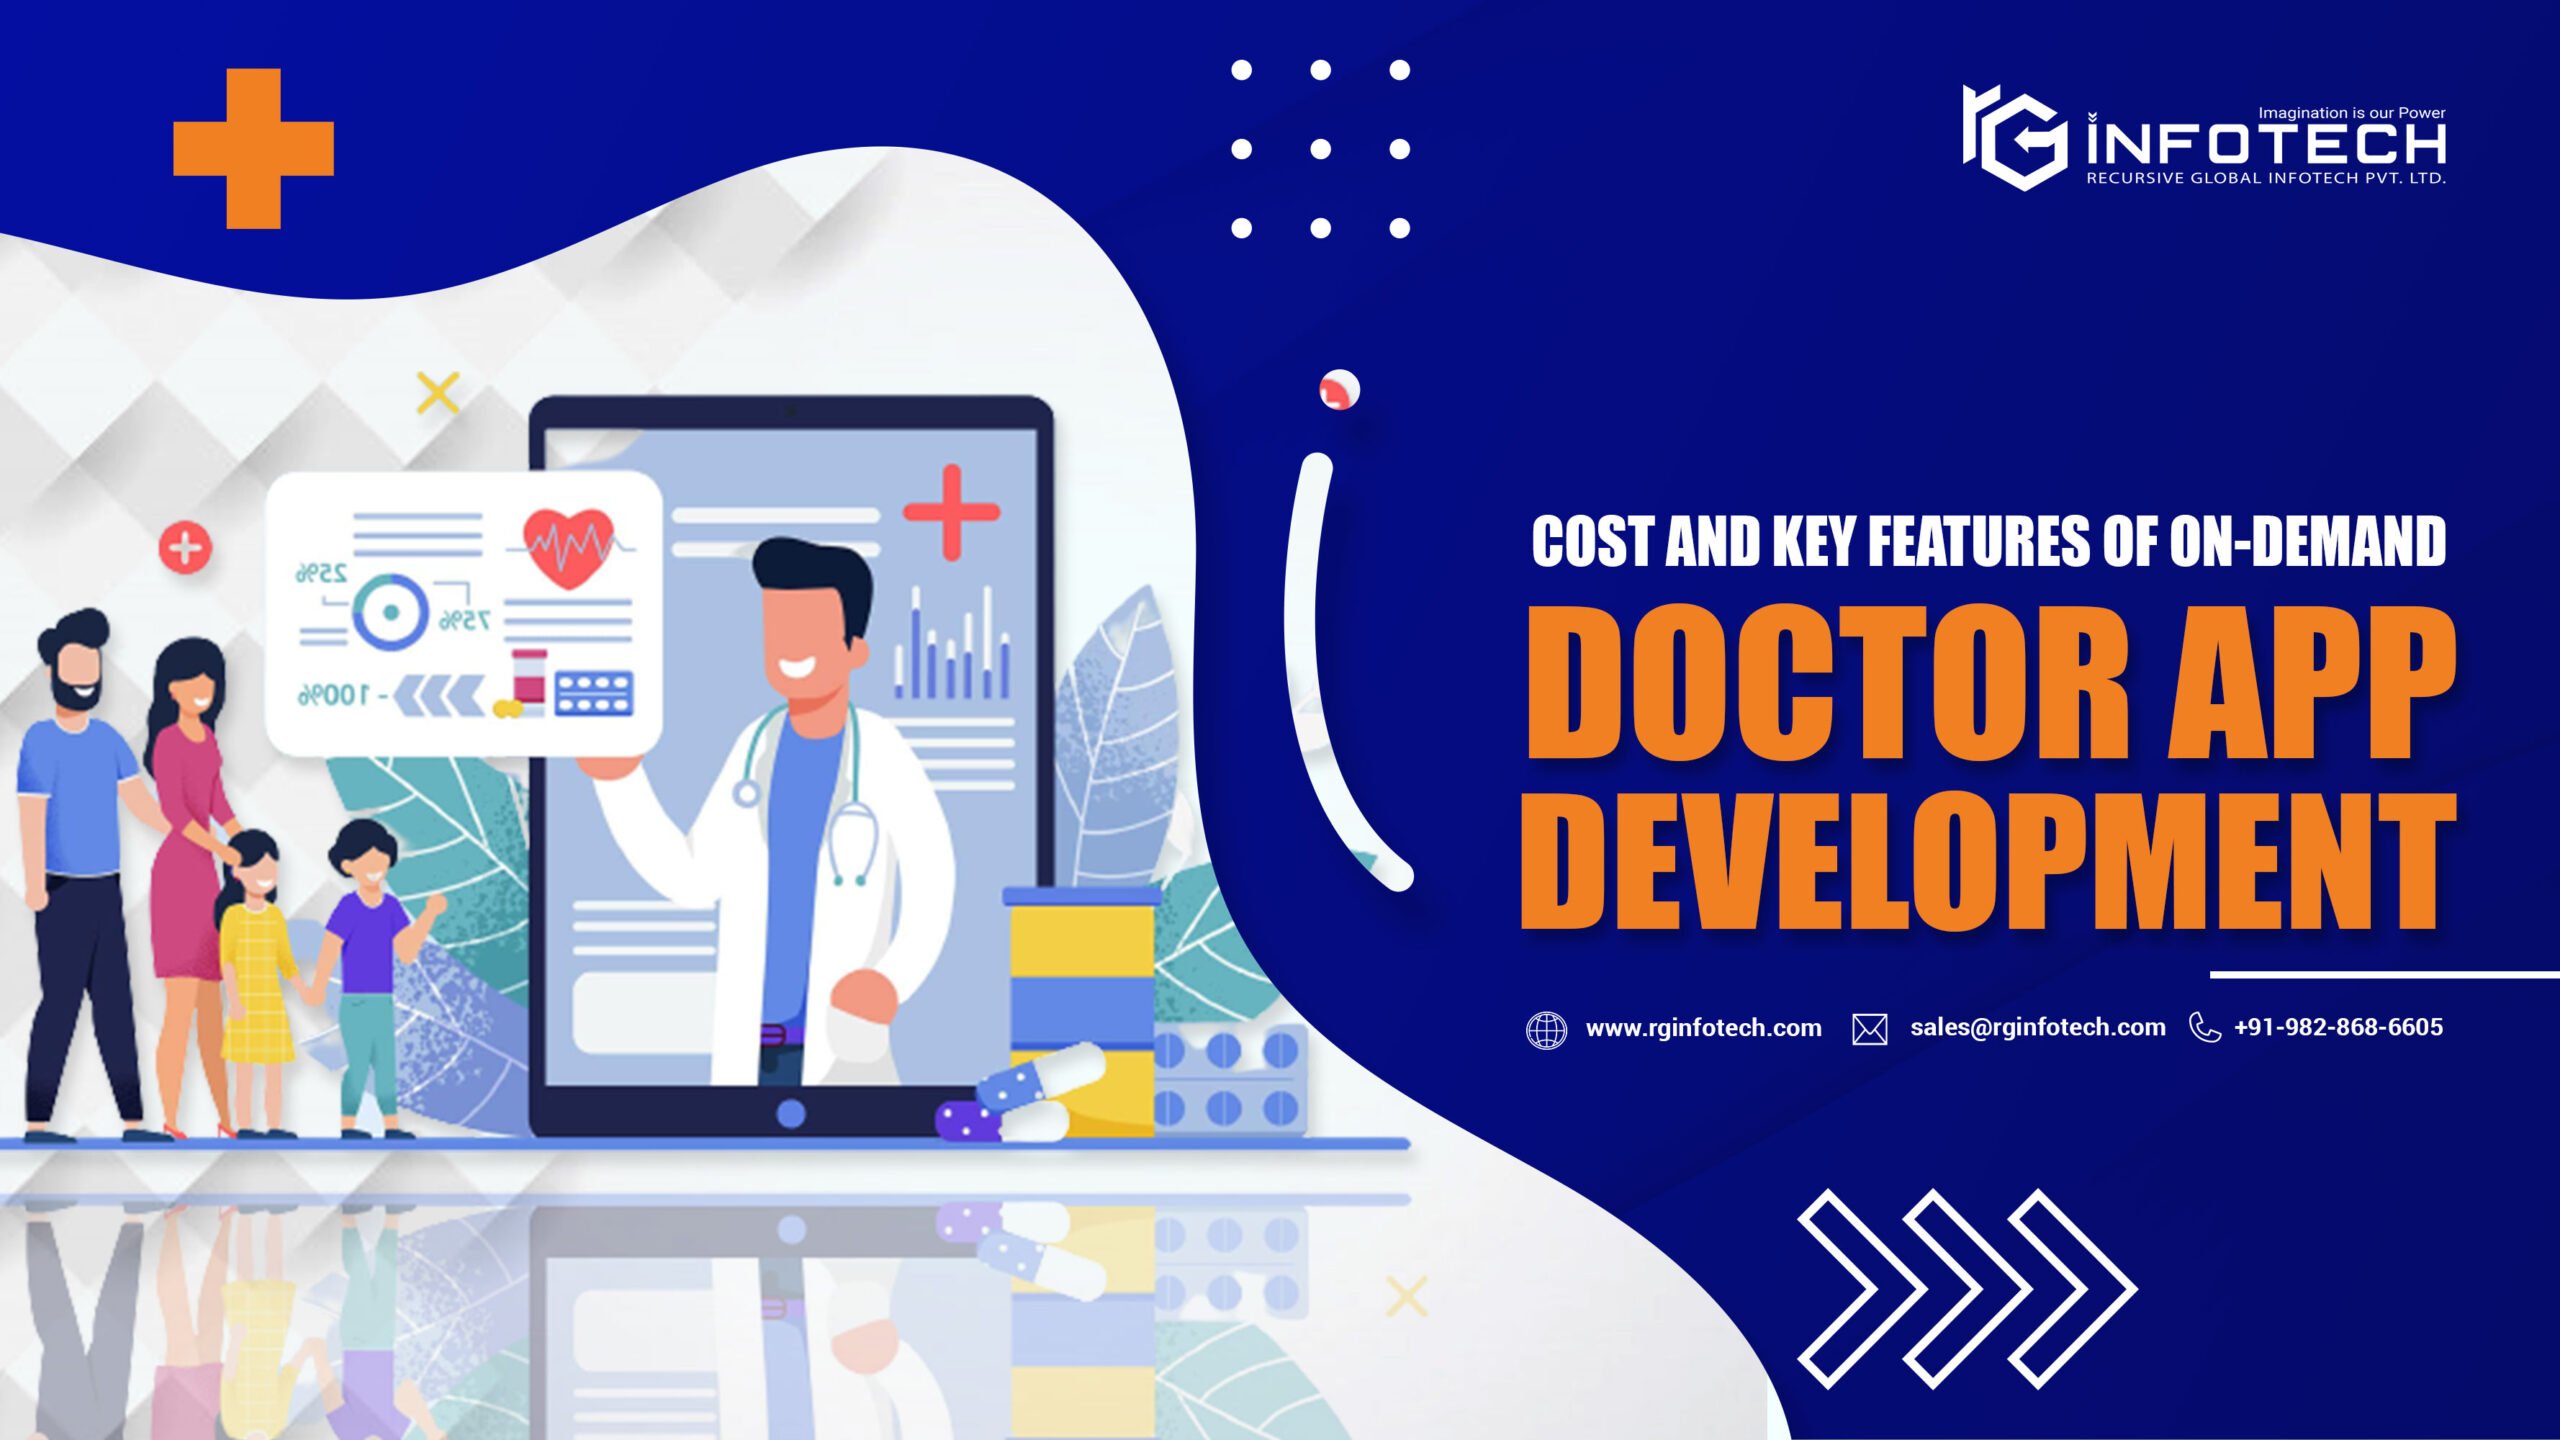 Cost & Key features of On-Demand Doctor App Development.